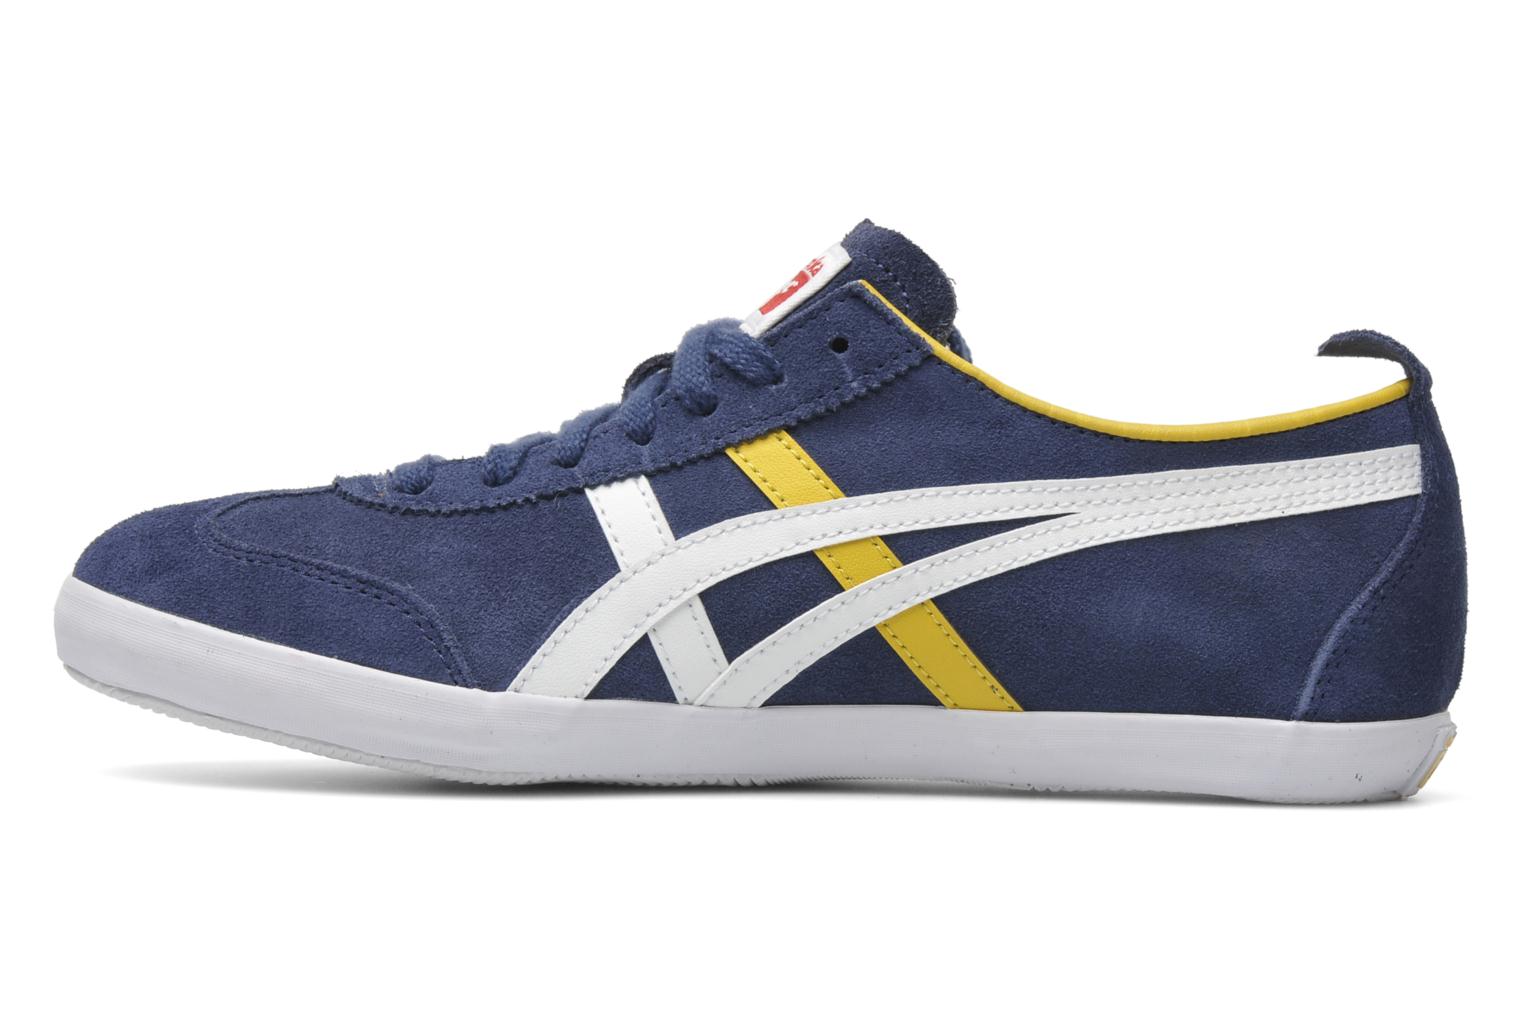 Onitsuka Tiger Mexico 66 Vulc Su Trainers in Blue at Sarenza.co.uk (163588)